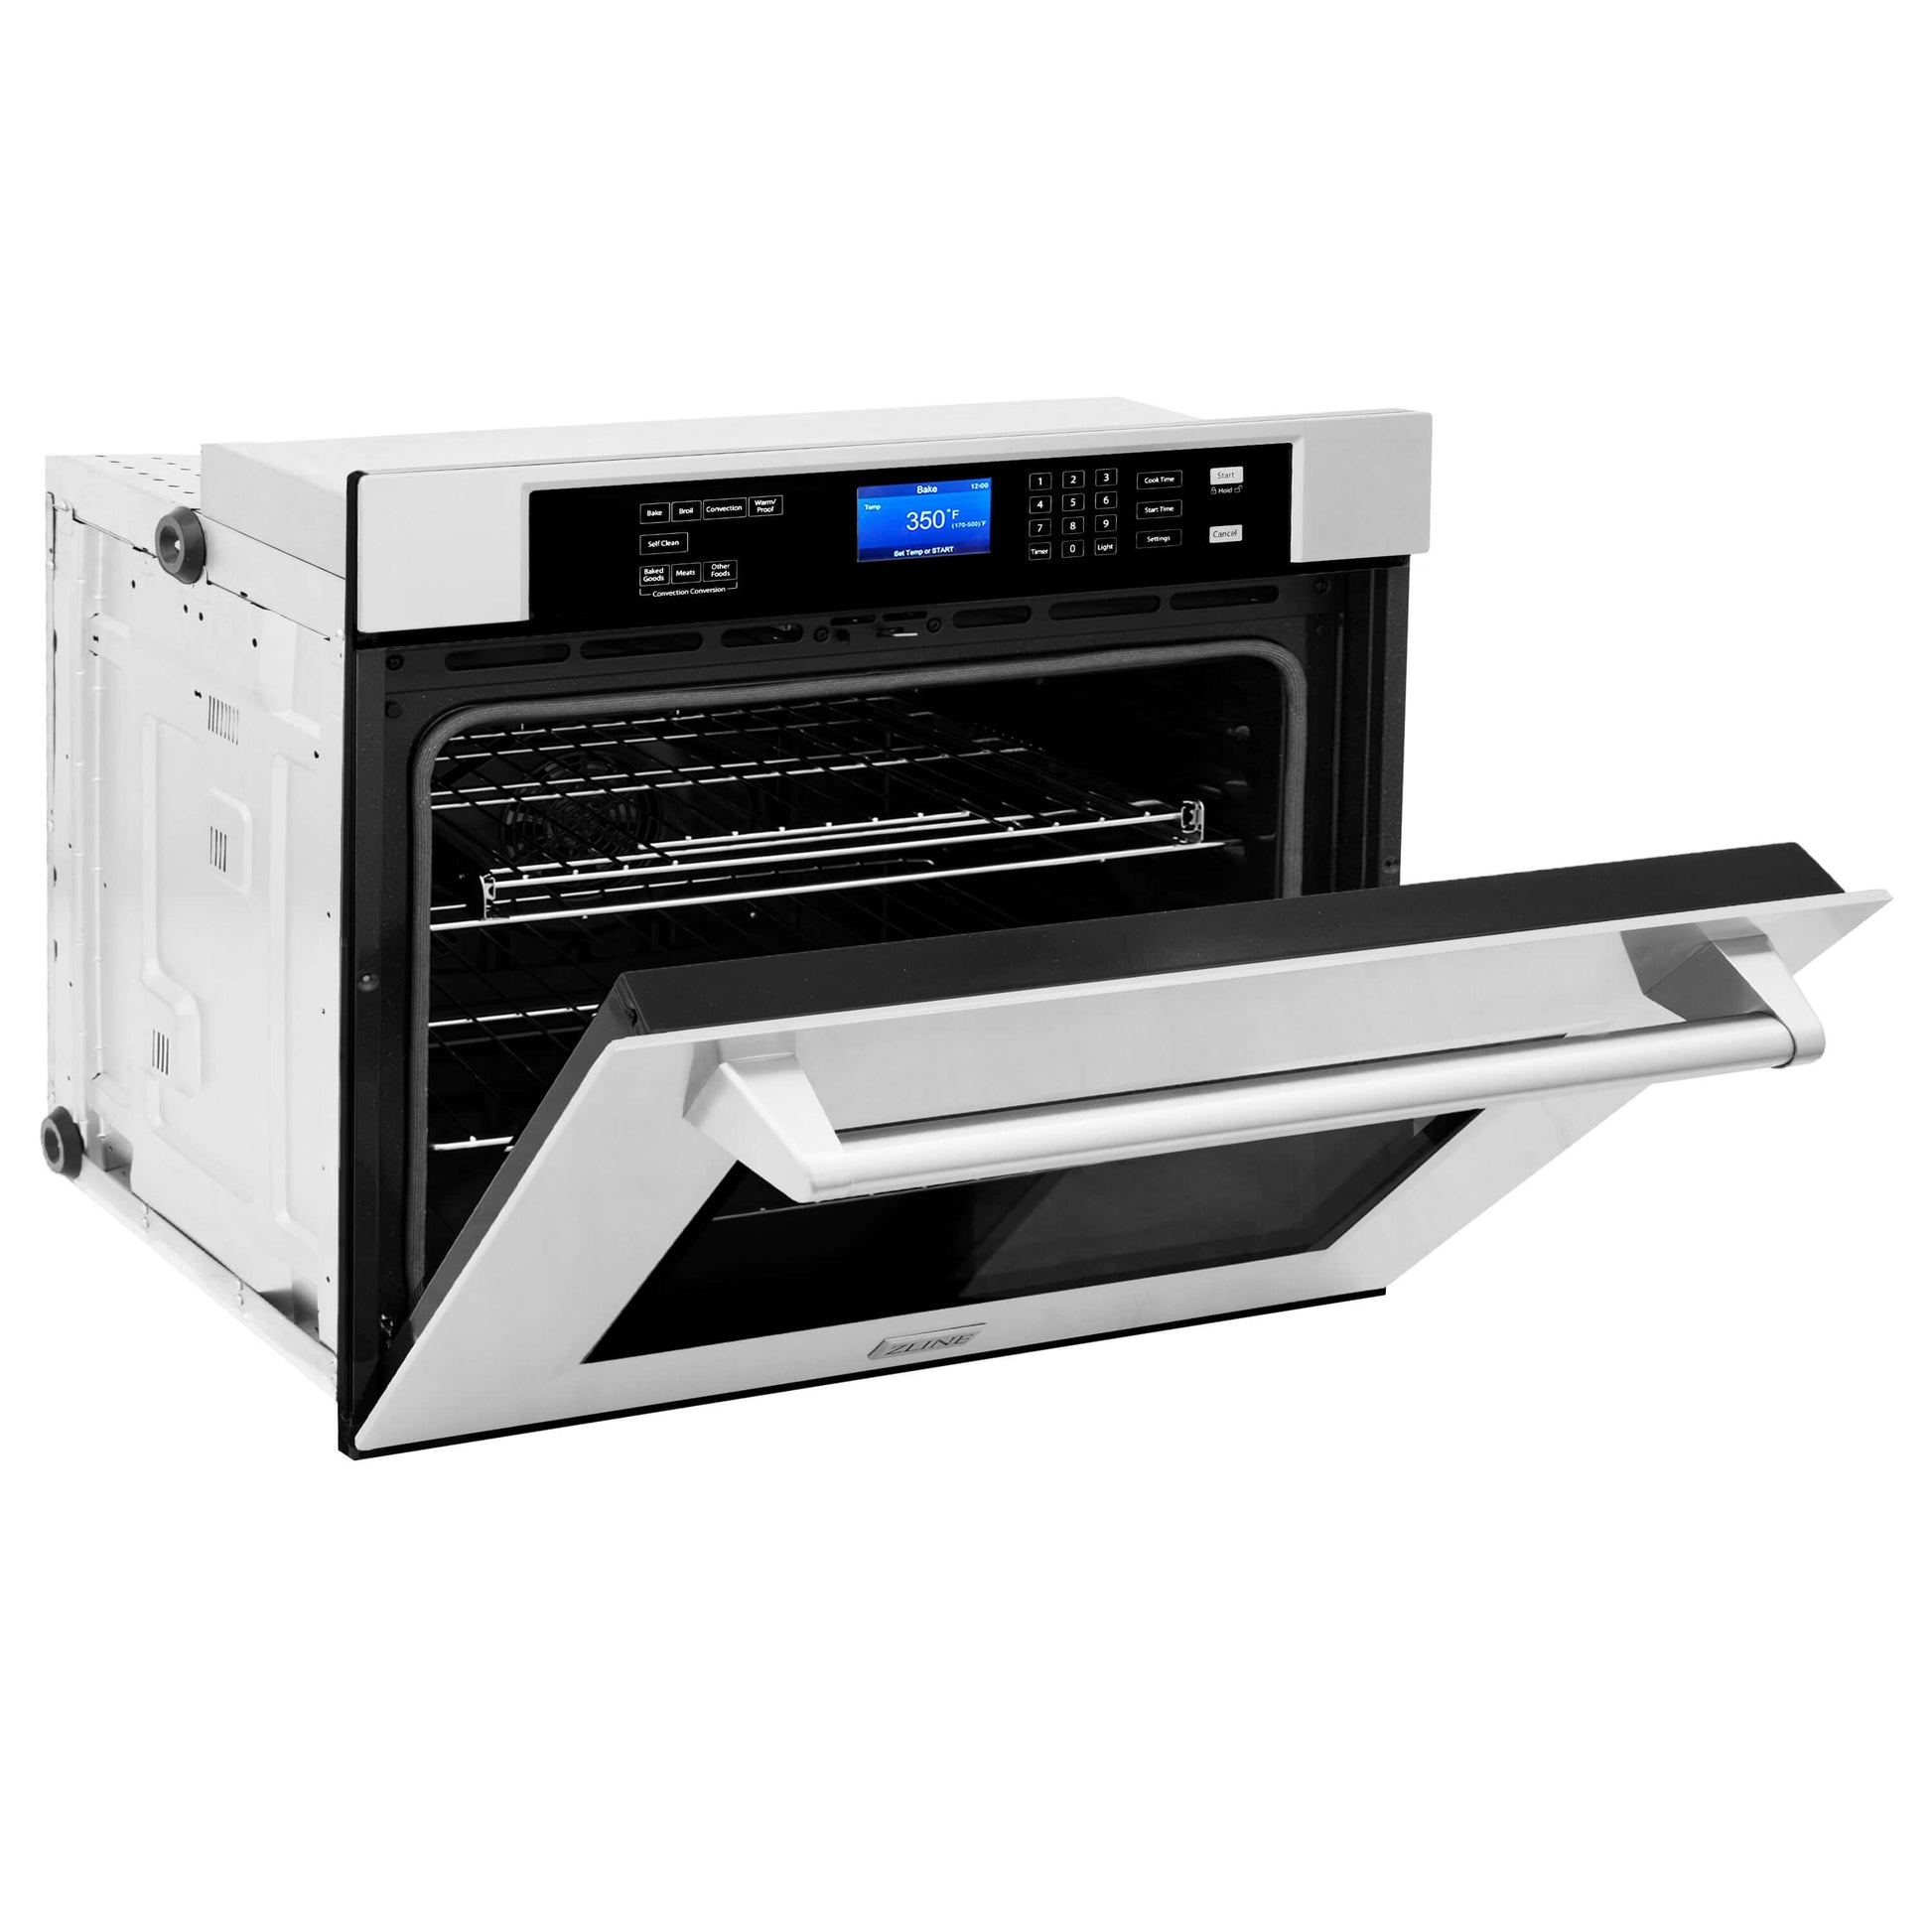 ZLINE 30 in. Professional Electric Single Wall Oven with Self Clean and True Convection in Stainless Steel (AWS-30) side, half open.